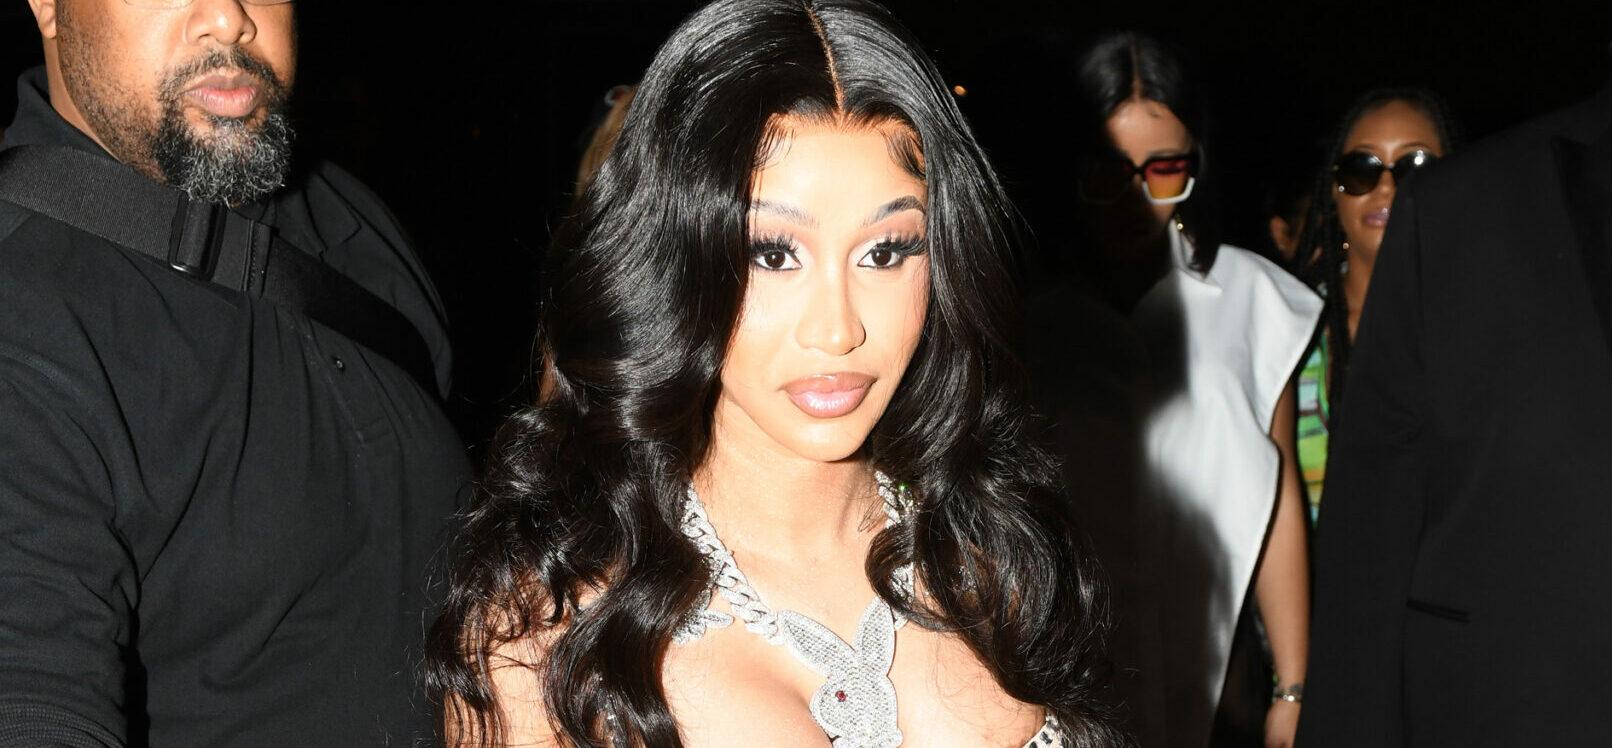 Cardi B shows off her ample curves in a sequin dress while arriving to PlayBoy x Big Bunny party during Art Basel weekend in Miami Beach